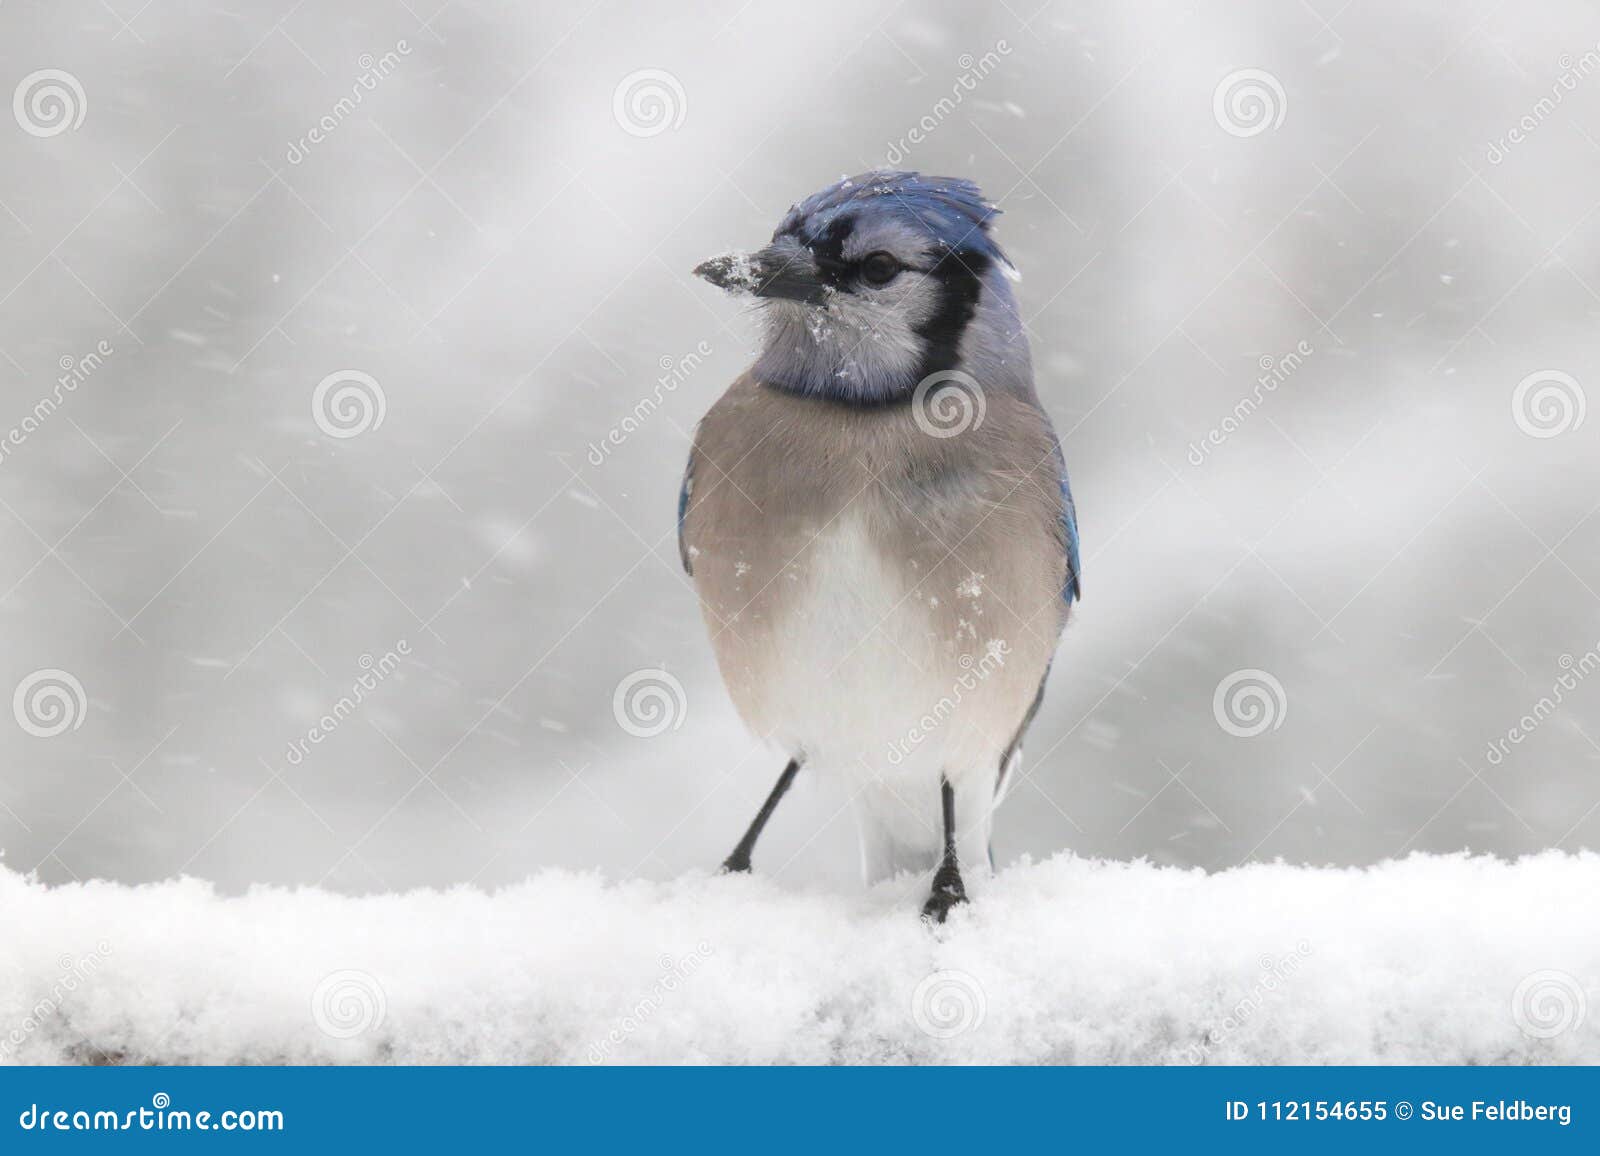 Winter Blue Jay in a Snow Storm Stock Image - Image of snowflakes ...